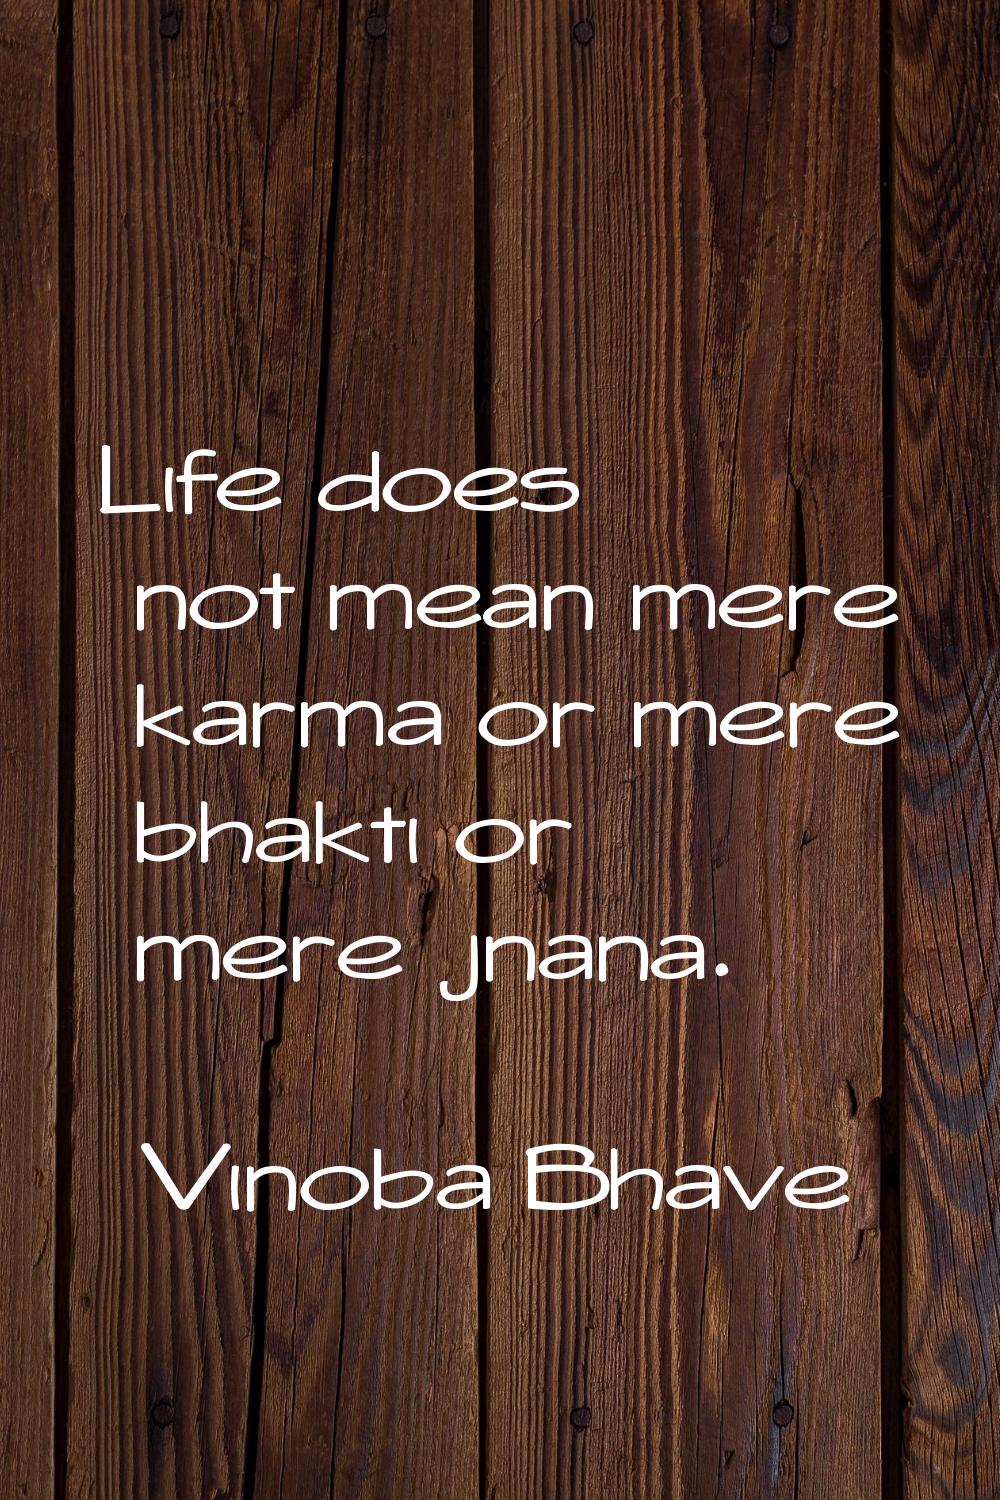 Life does not mean mere karma or mere bhakti or mere jnana.